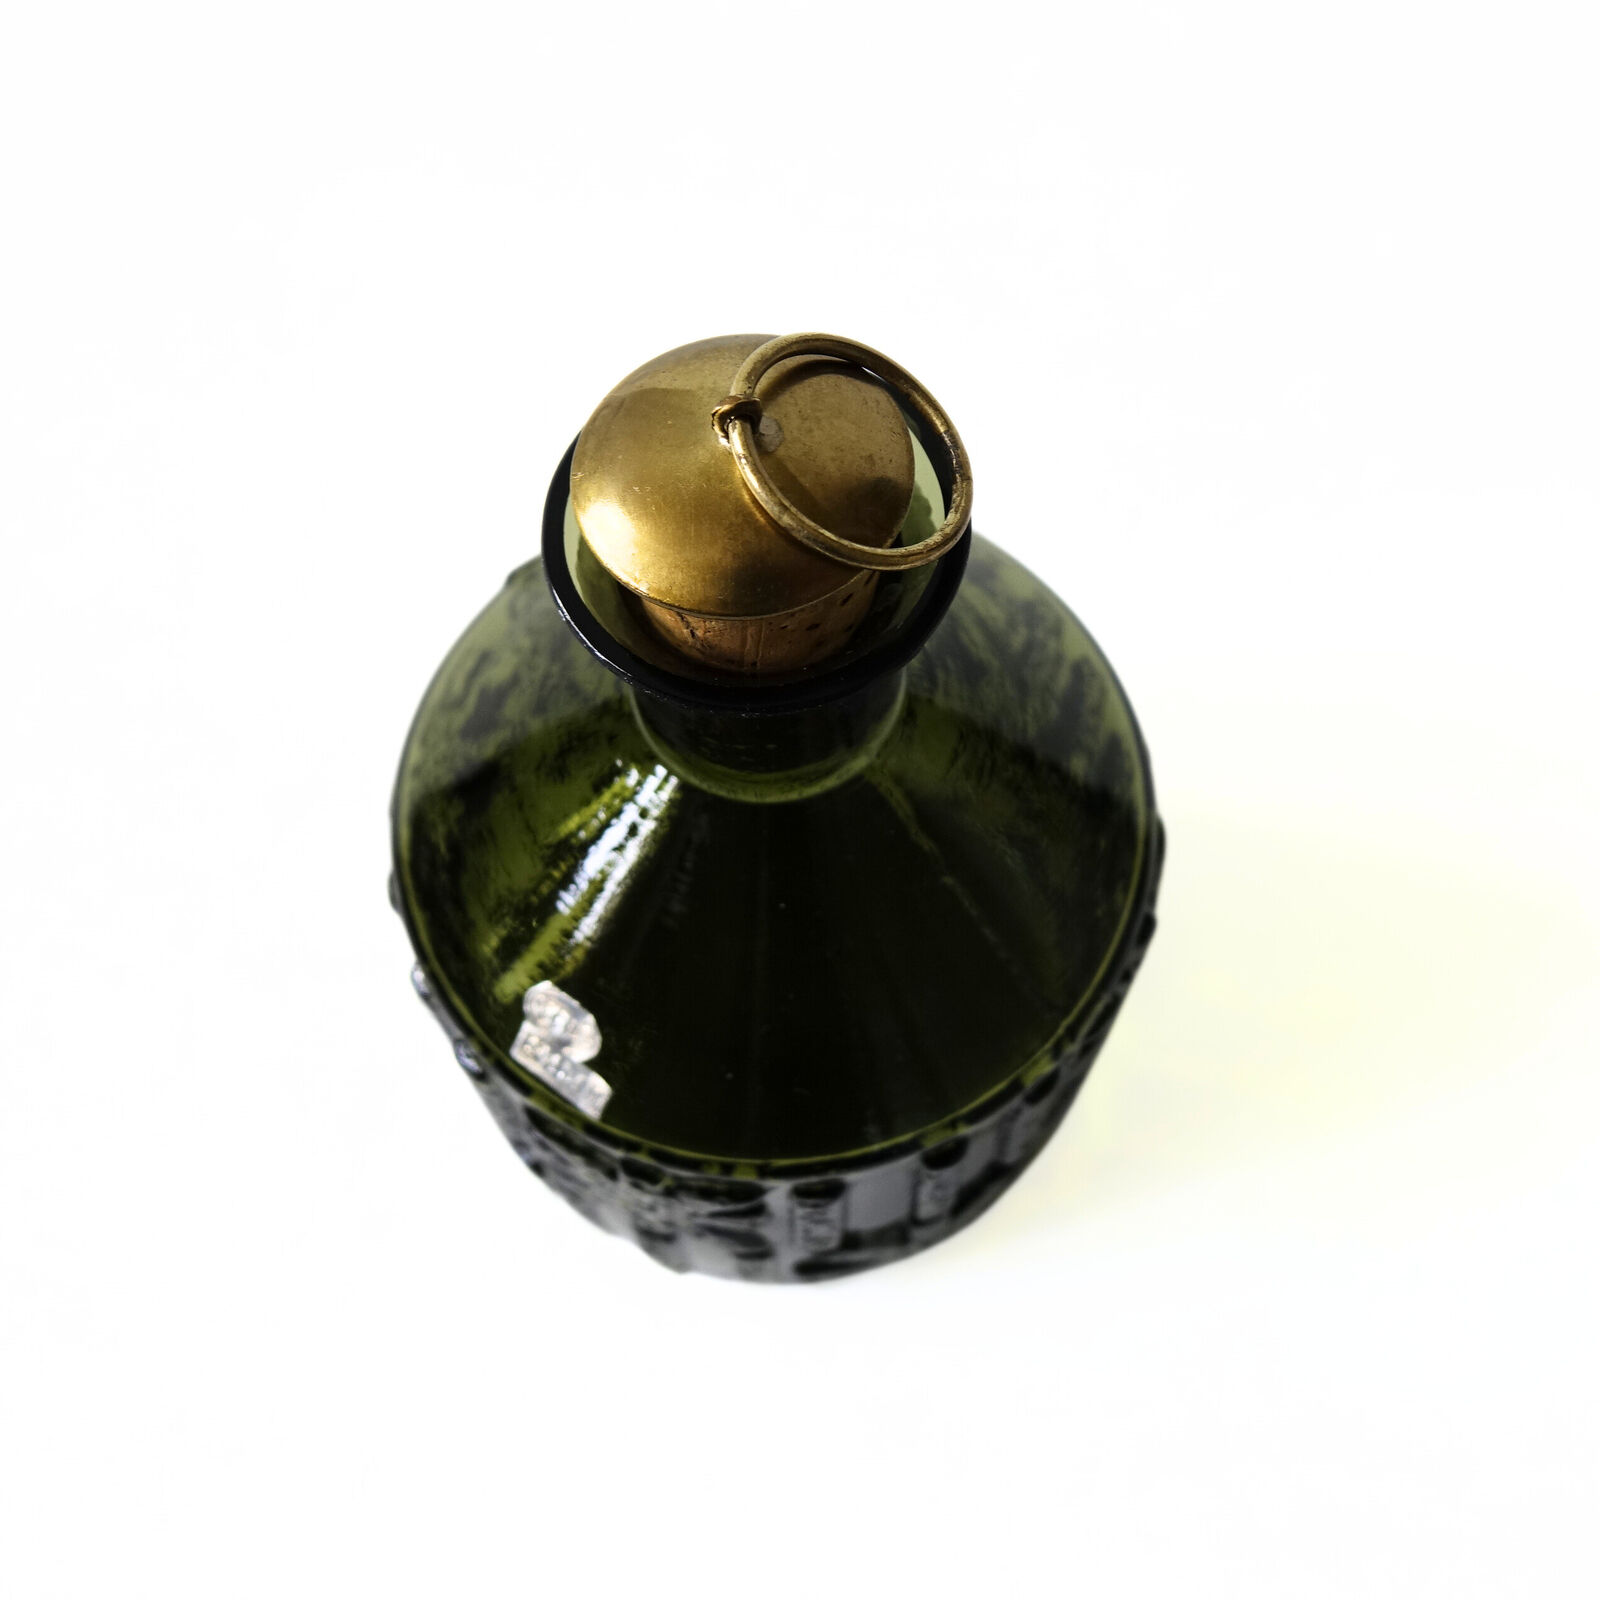 Vintage green glass decanter with cork and brass lid from SKRUF Sweden